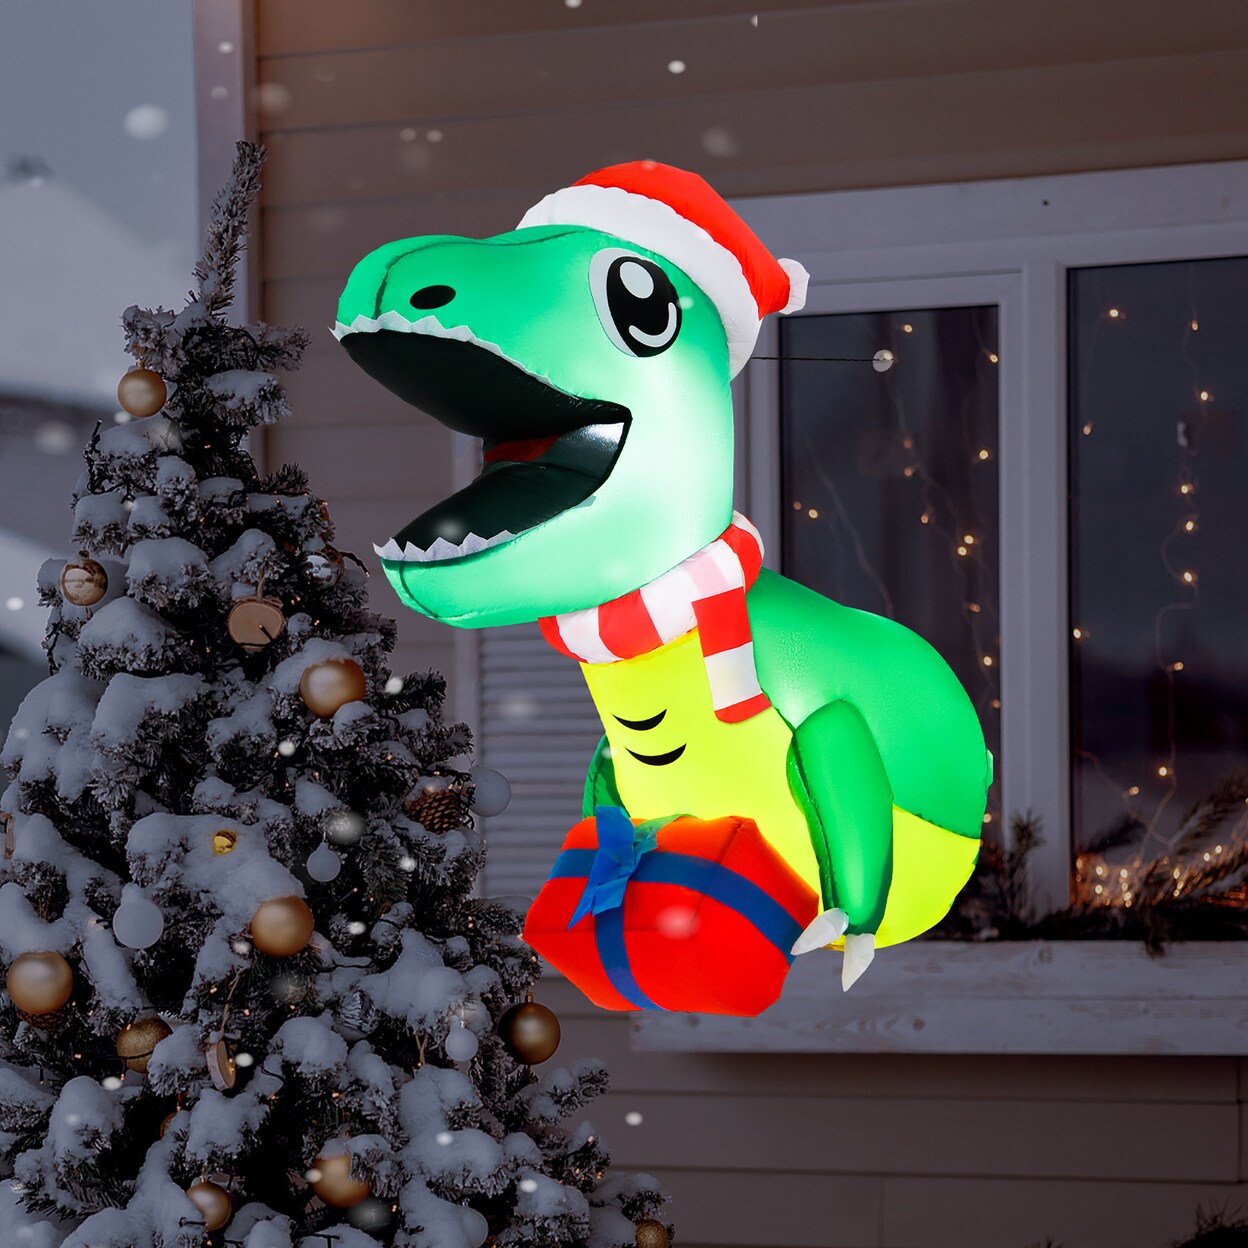 Gymax Inflatable Dinosaur Broke Out from Window w/ Built-in LED Lights Indoor Outdoor Party